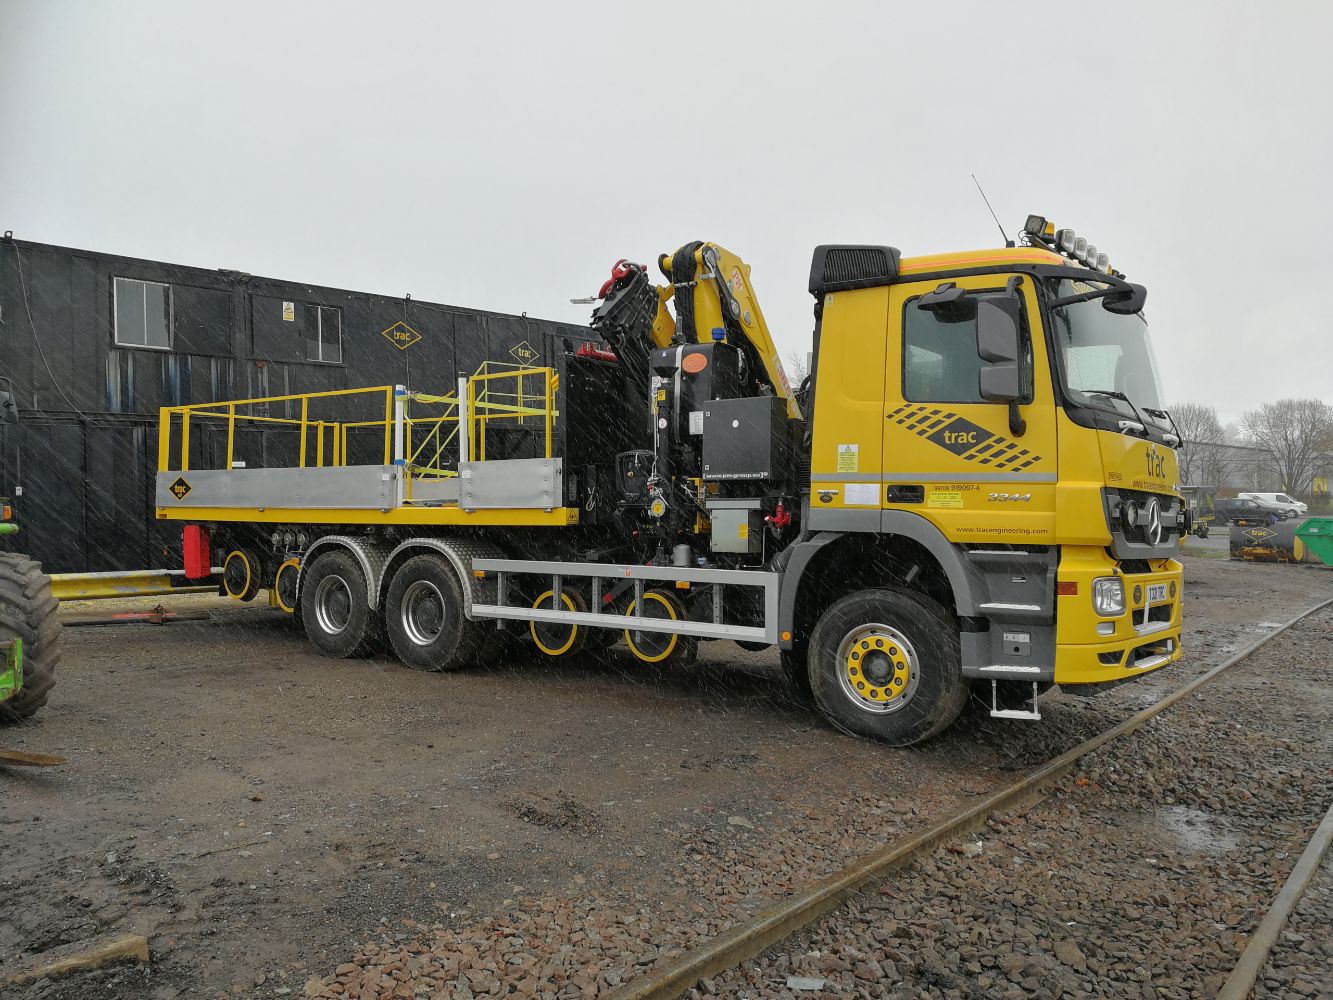 Road Rail Maintenance Vehicles & Access Plant (w6a gauge) (available immediately by private treaty)